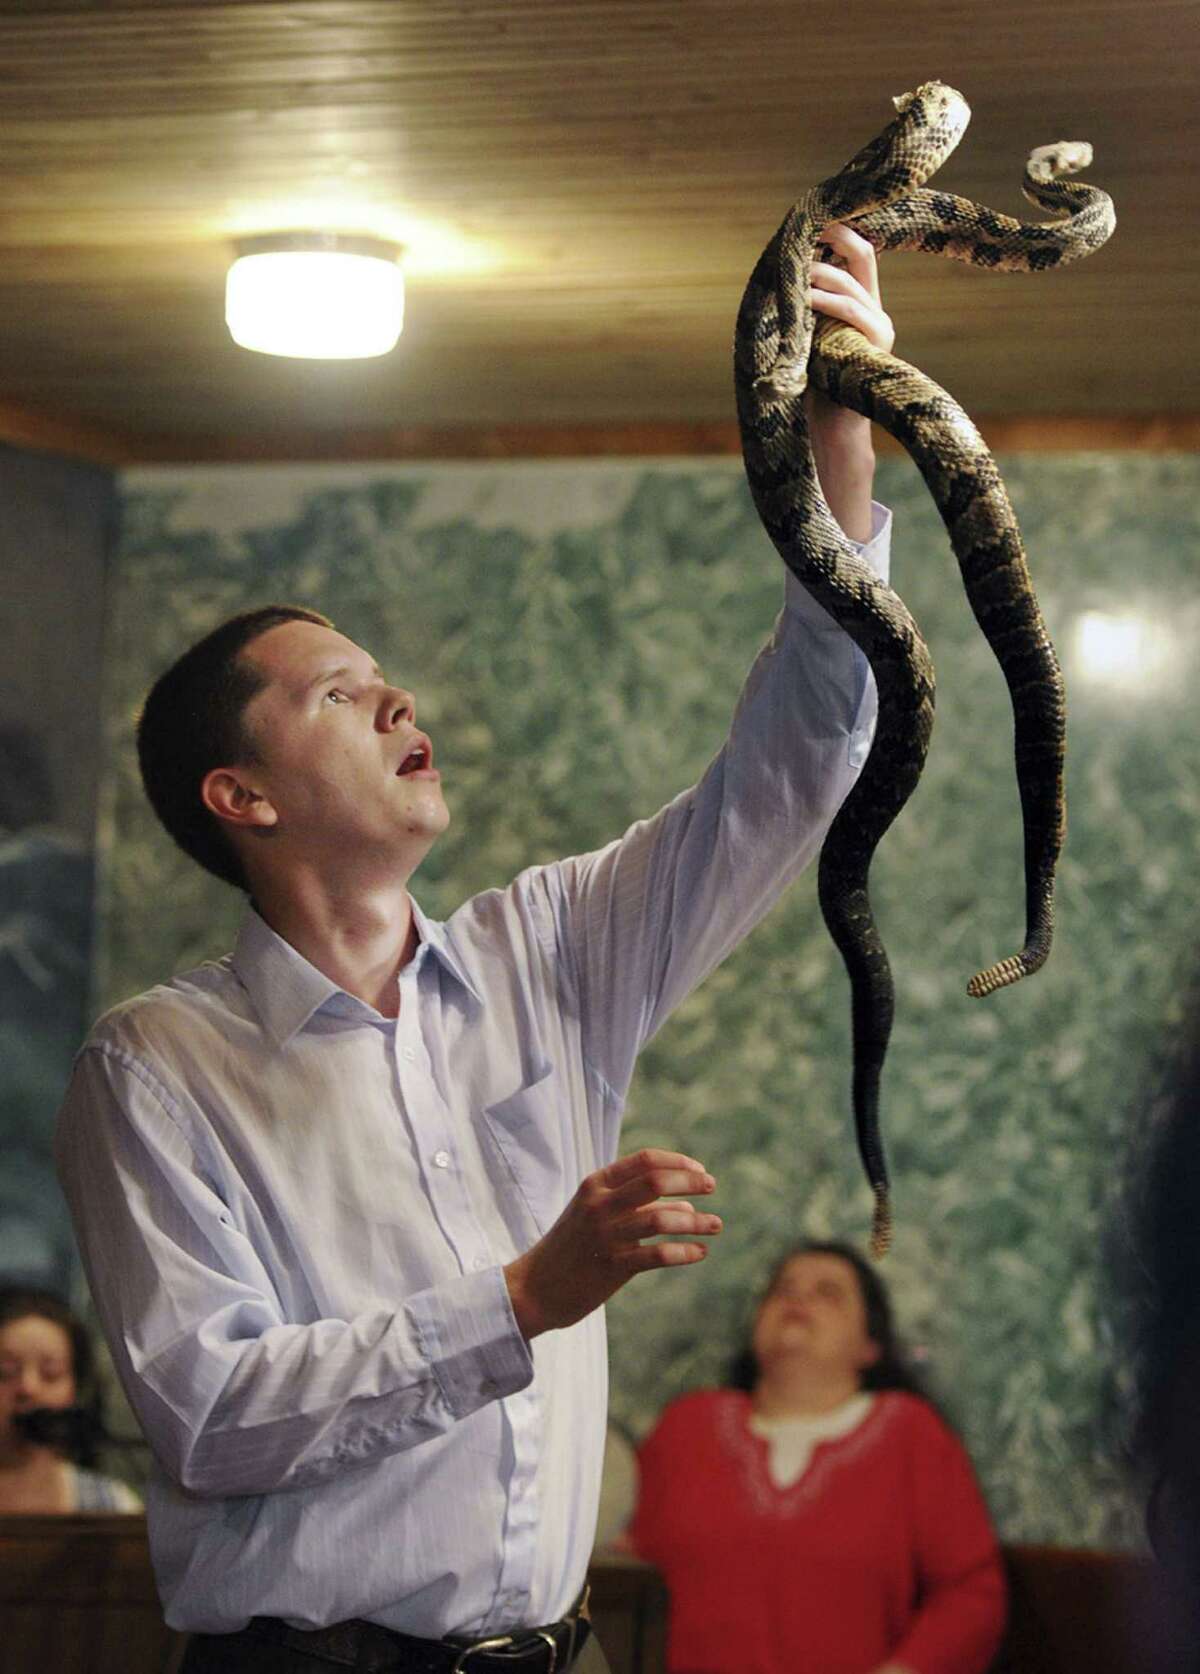 Texas Poison Center Network has handled almost 20 rattlesnake bite calls this summer, a slight rise from last year's bite figures. The network tackled 18 rattlesnake bite calls in June and July, The Amarillo Globe-News reported. That's up from last year, Rhonica Farrar, community outreach specialist for Texas Panhandle Poison Cente told the Globe-News, when authorities recorded 15. Pictured, Andrew Hamblin, pastor of Tabernacle Church of God in LaFollette, Tenn., holds up rattlesnakes during a service in 2012.